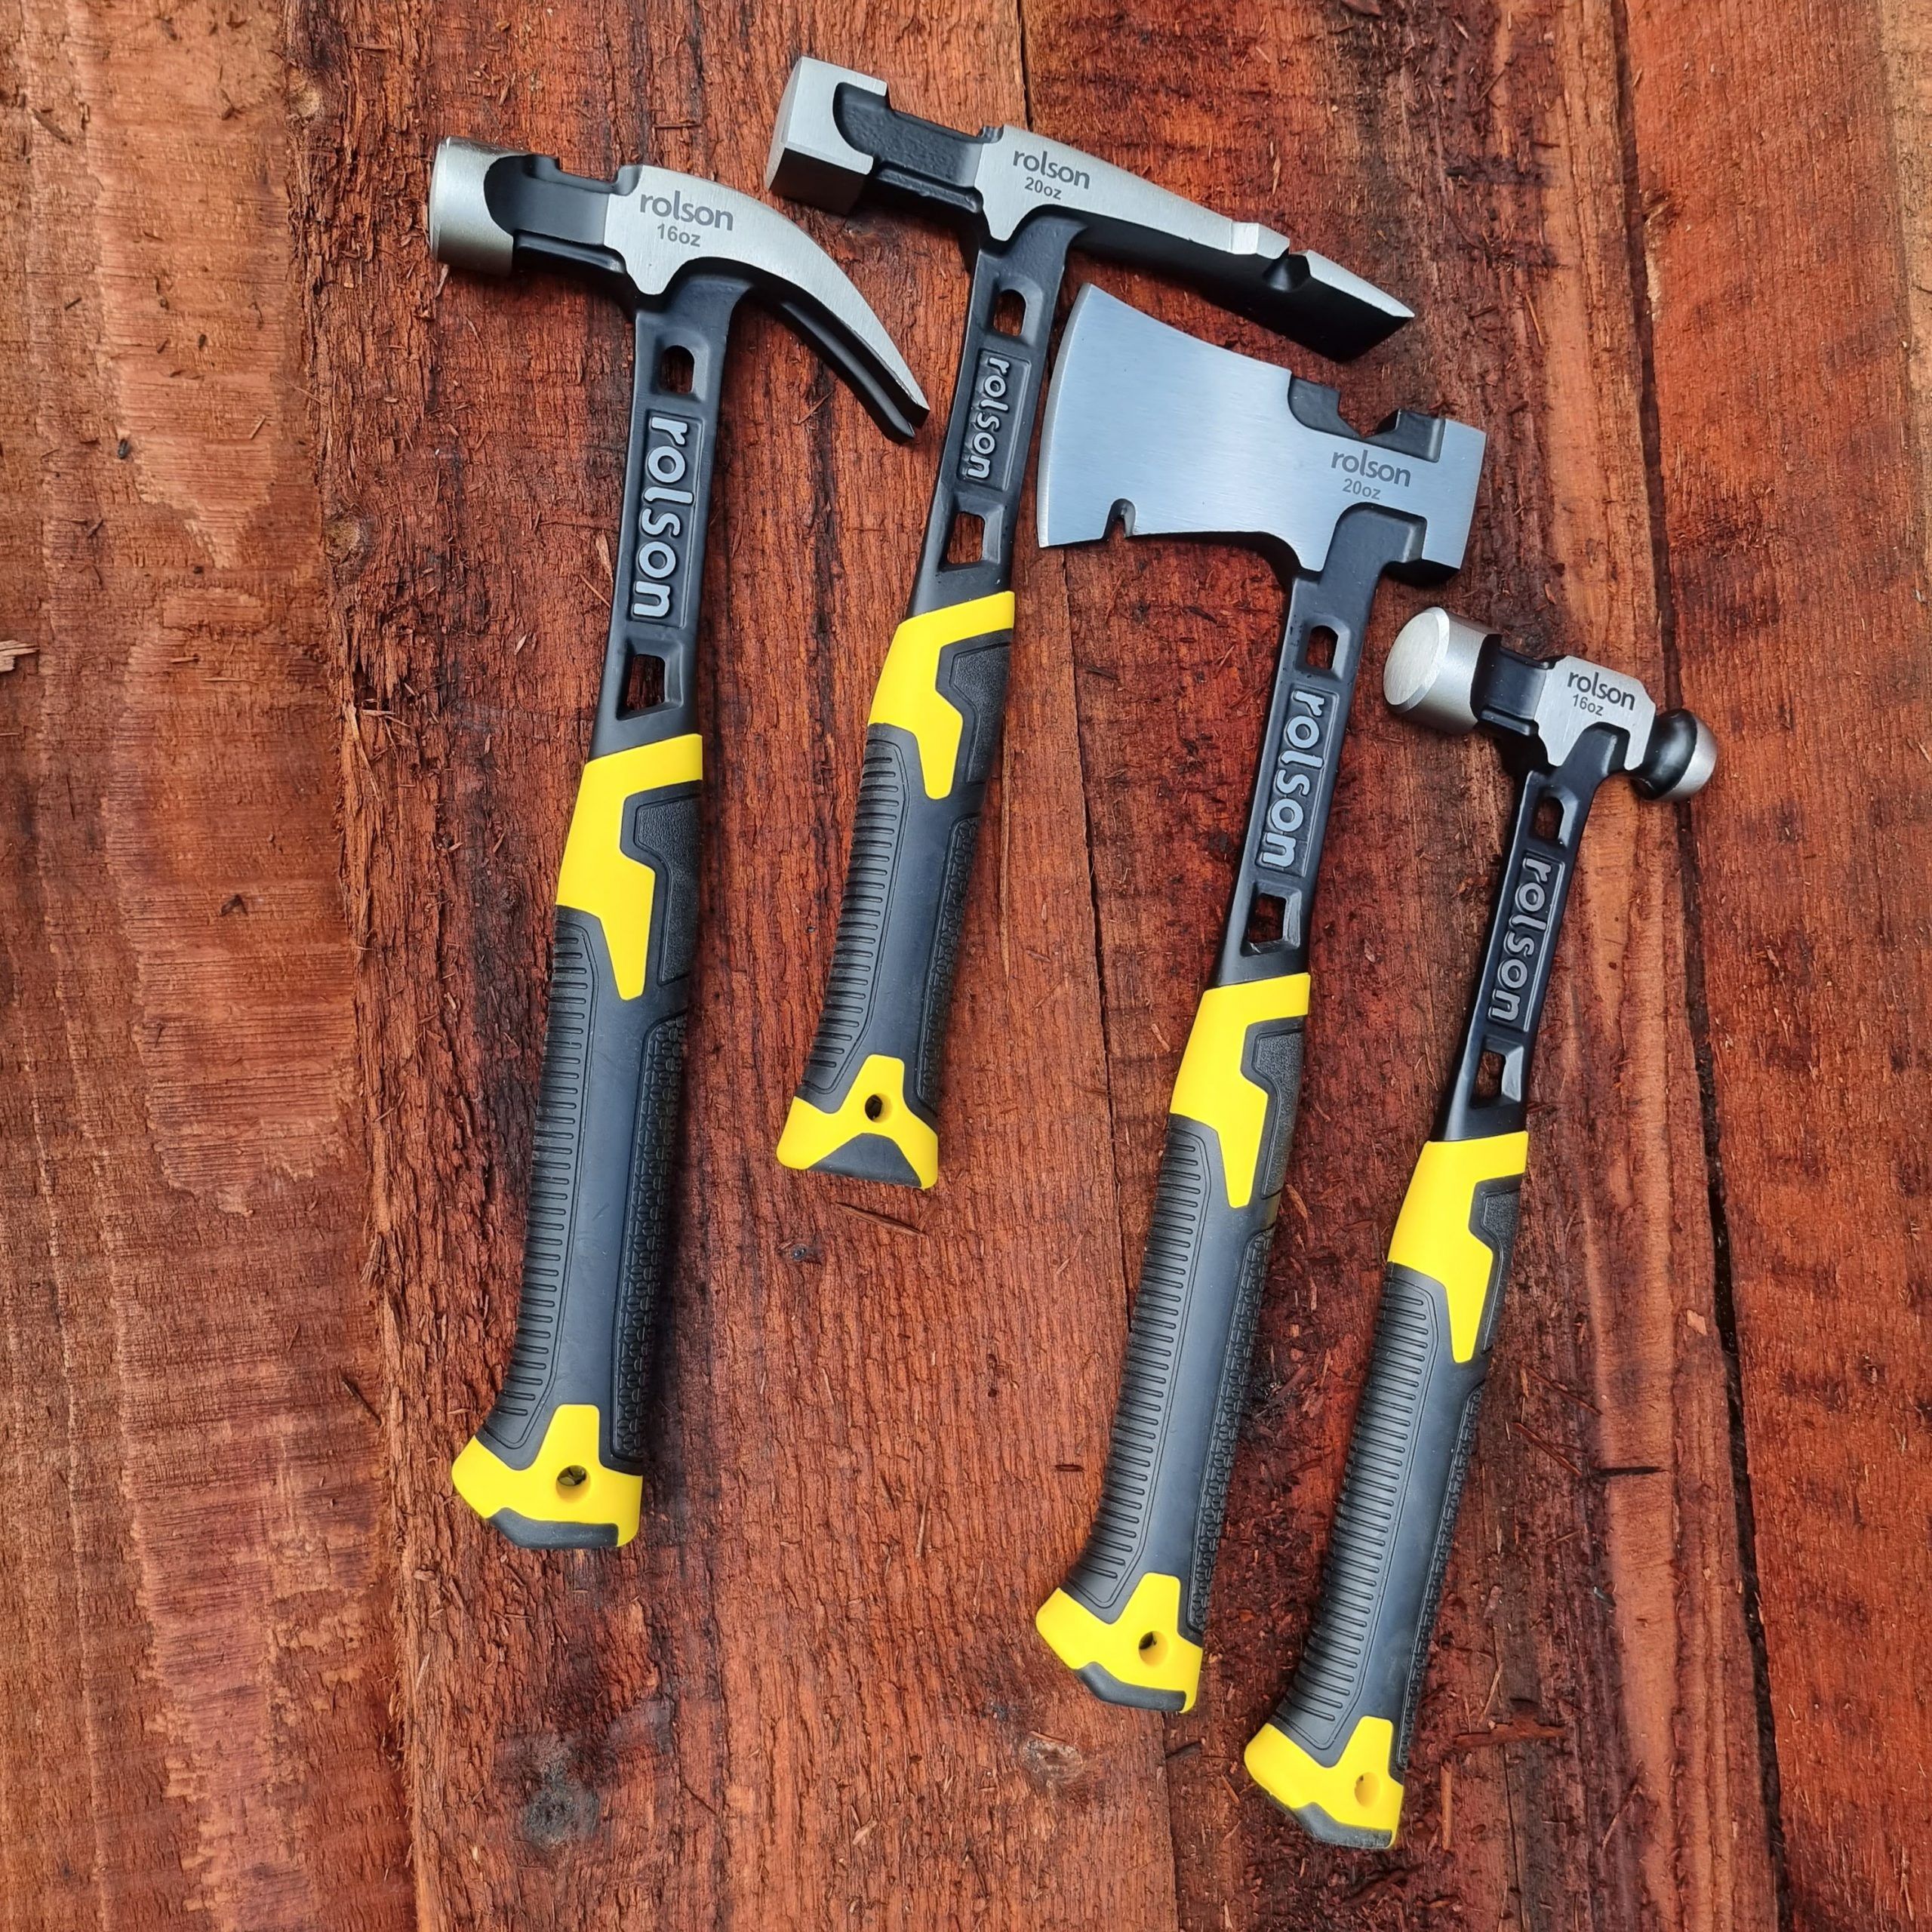 Range Review - Rolson Tools